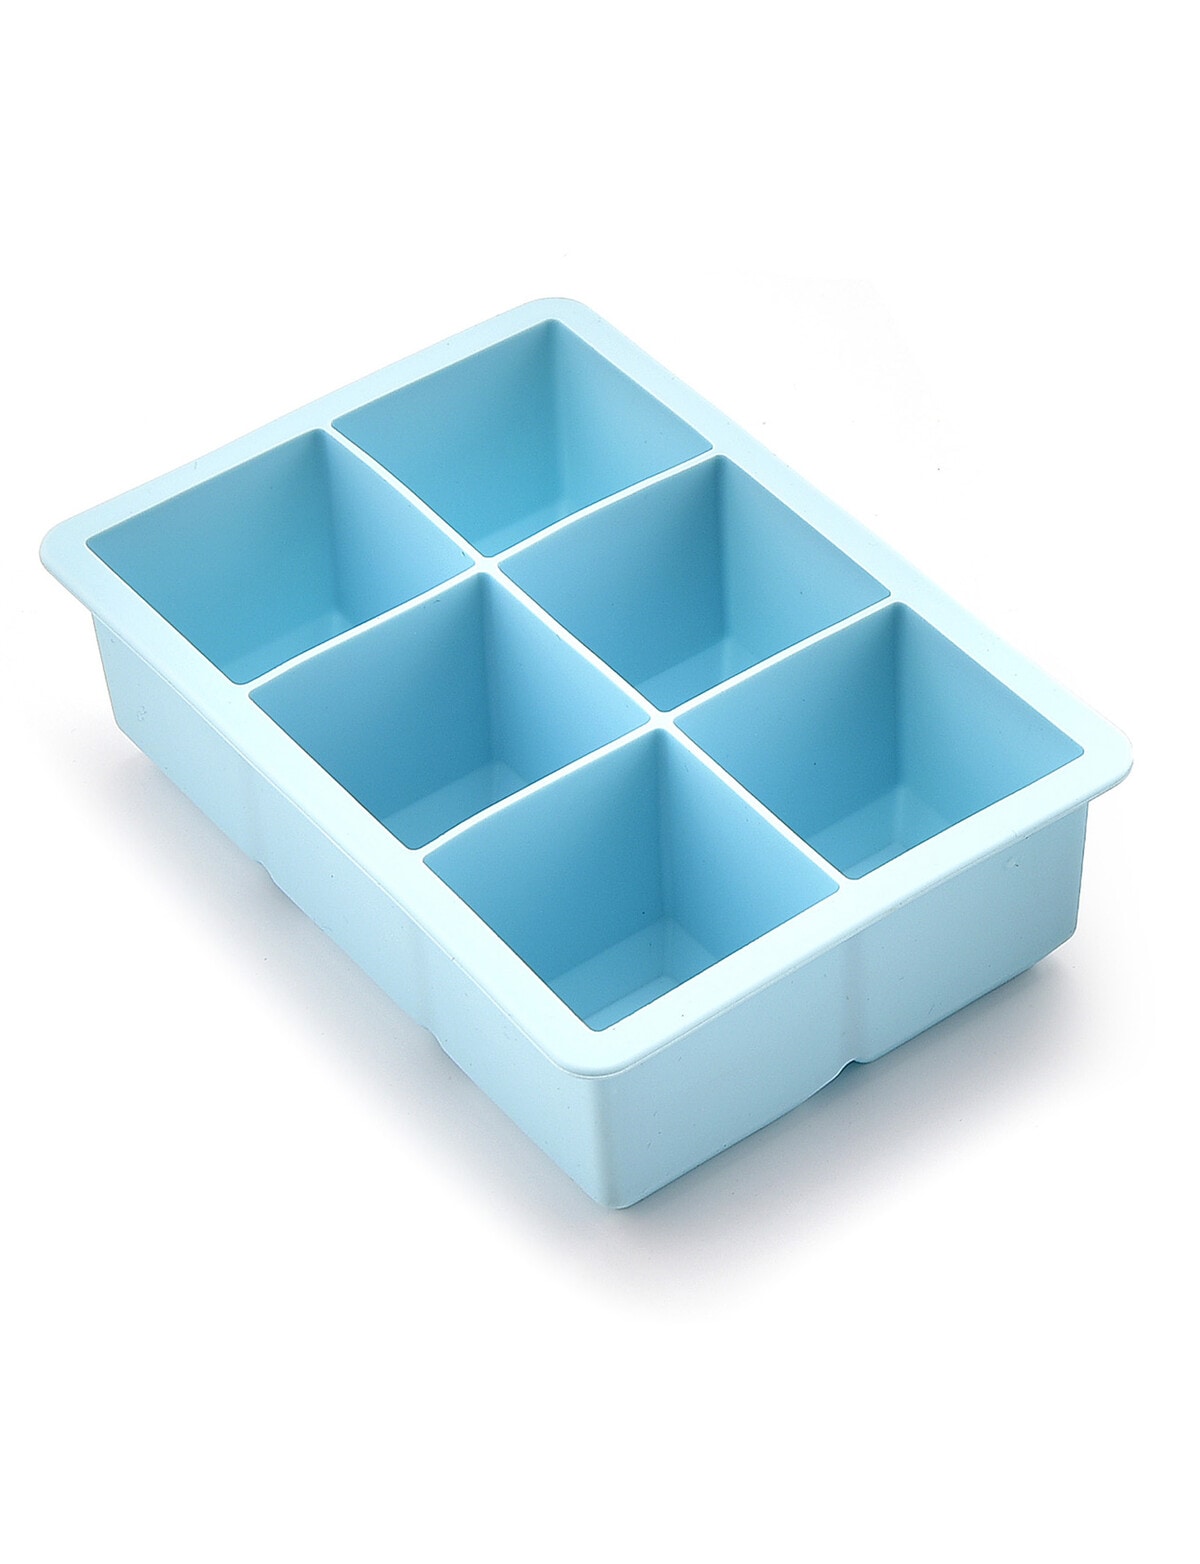 Joie XL ICE CUBE TRAY - (BLUE)